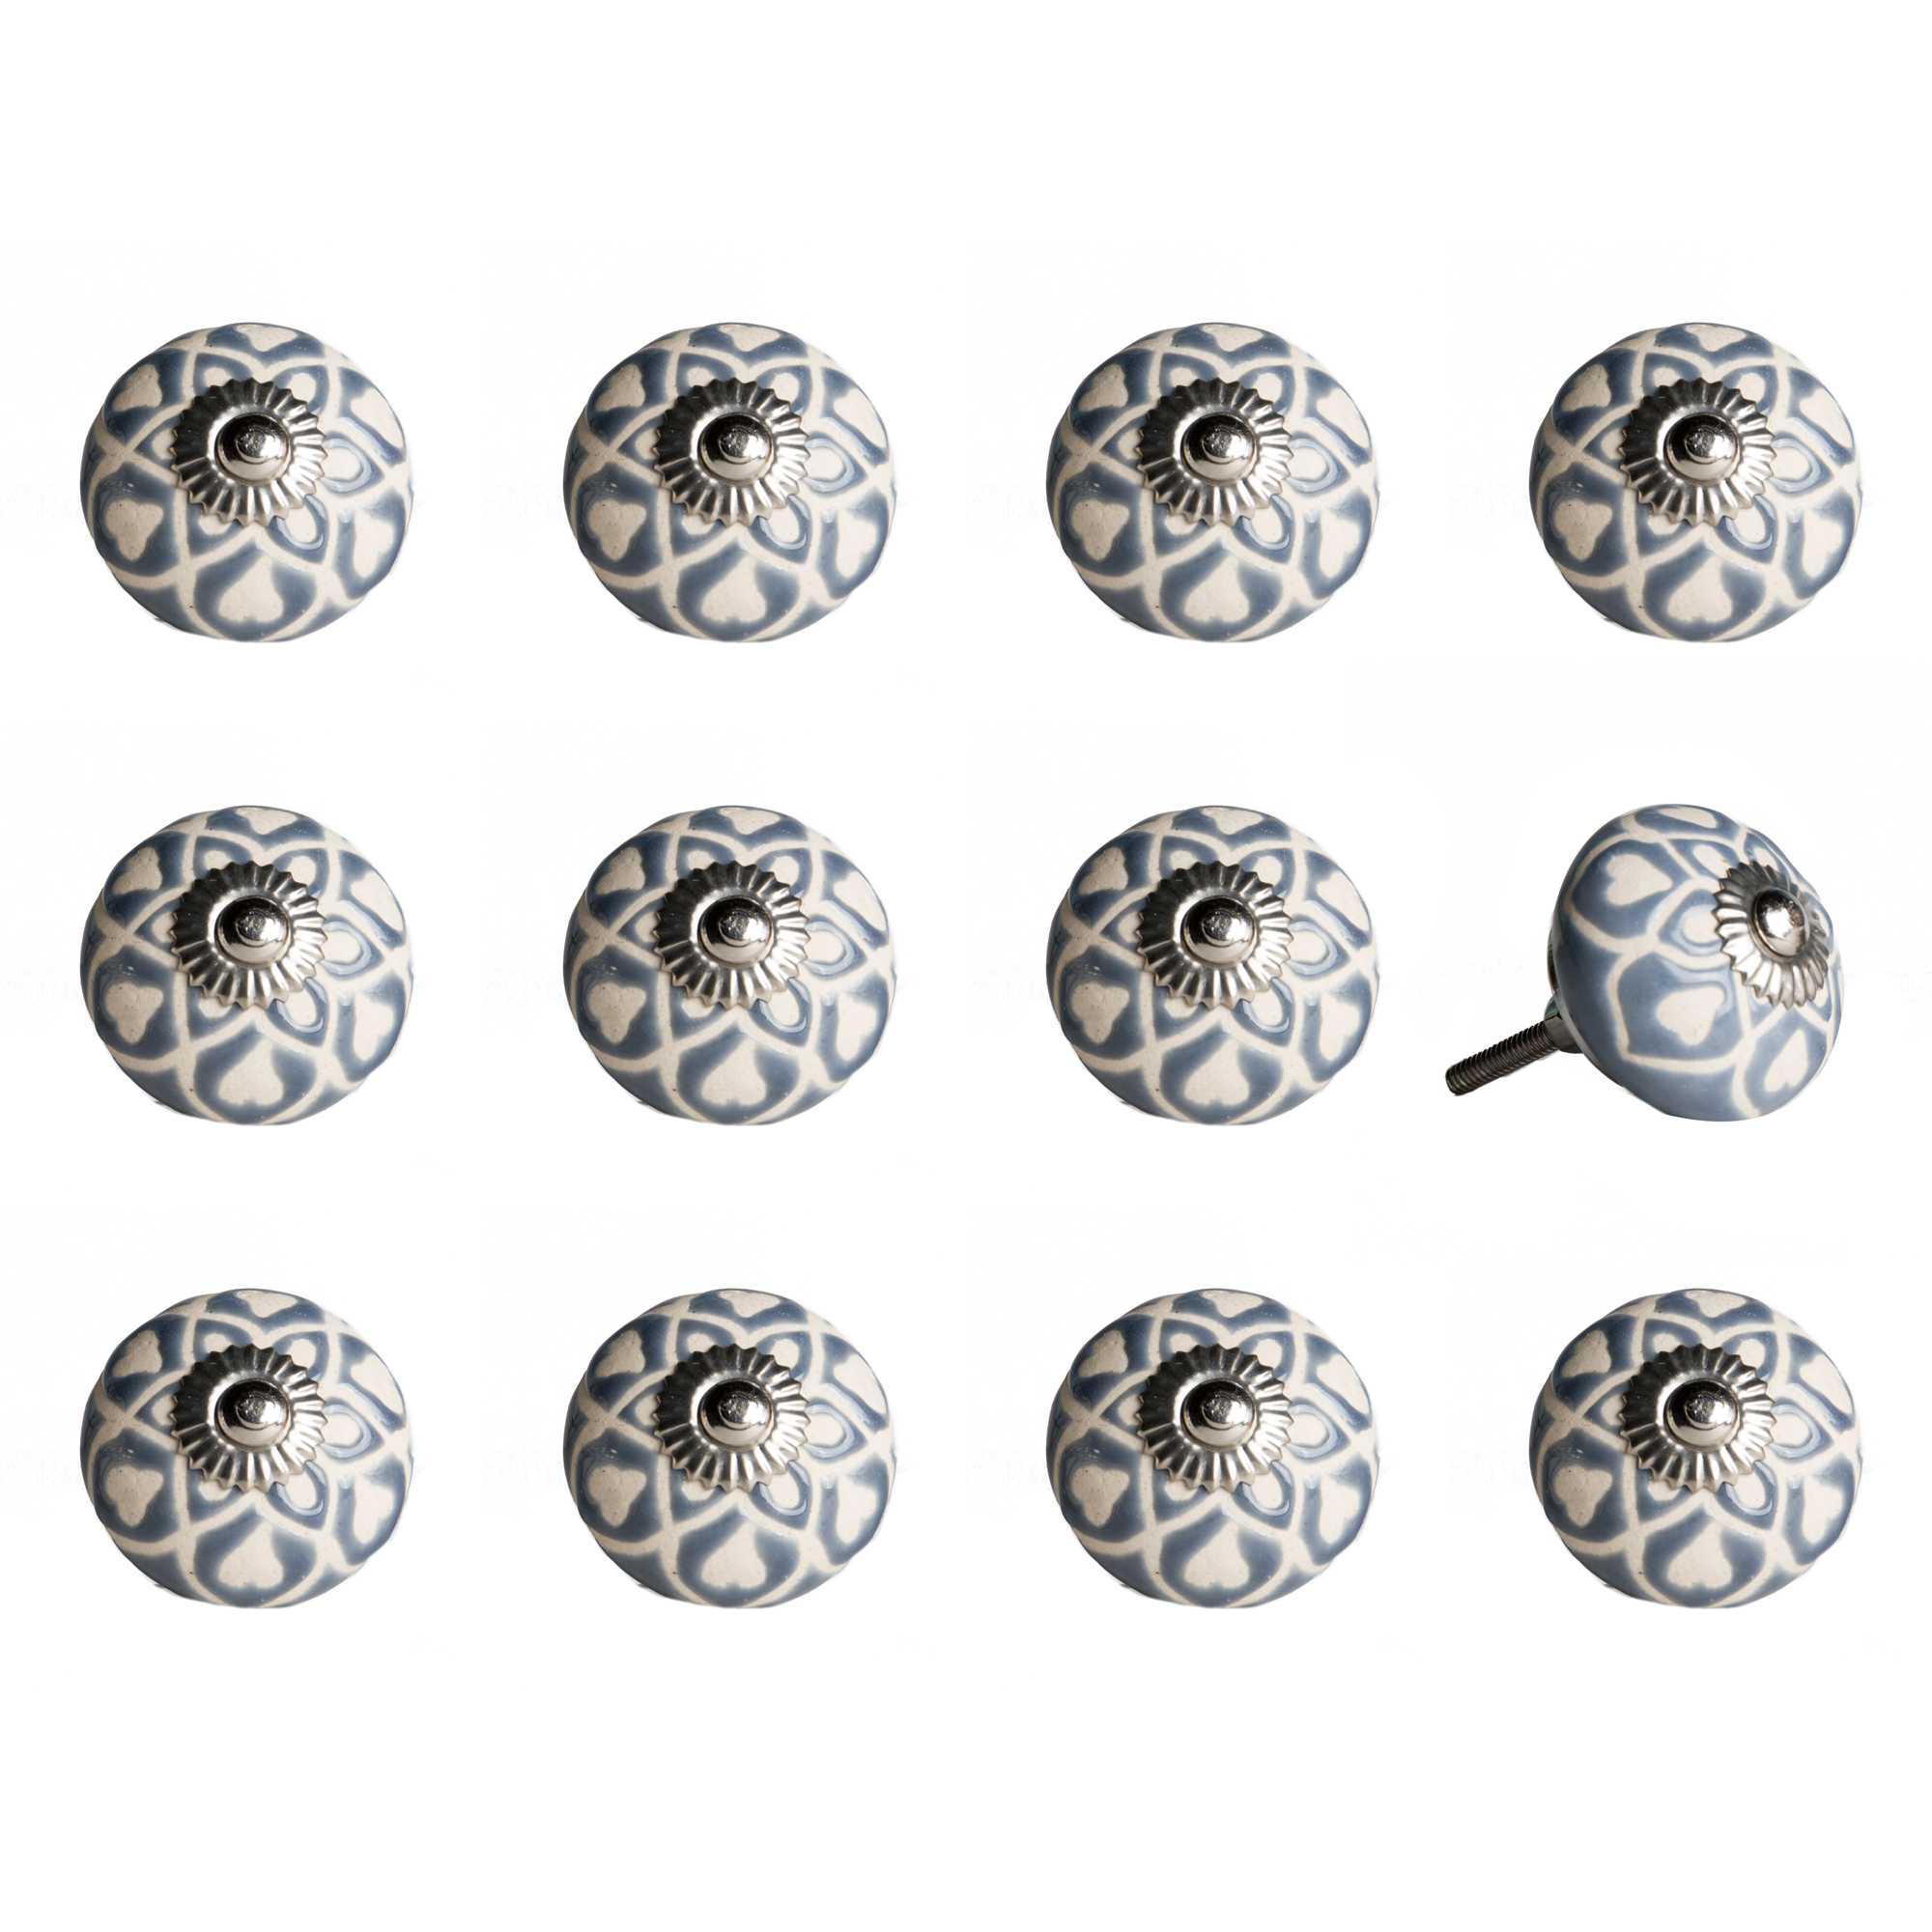 1.5" x 1.5" x 1.5" Blue, Cream (Beige), with Silver - Knobs 12-Pack